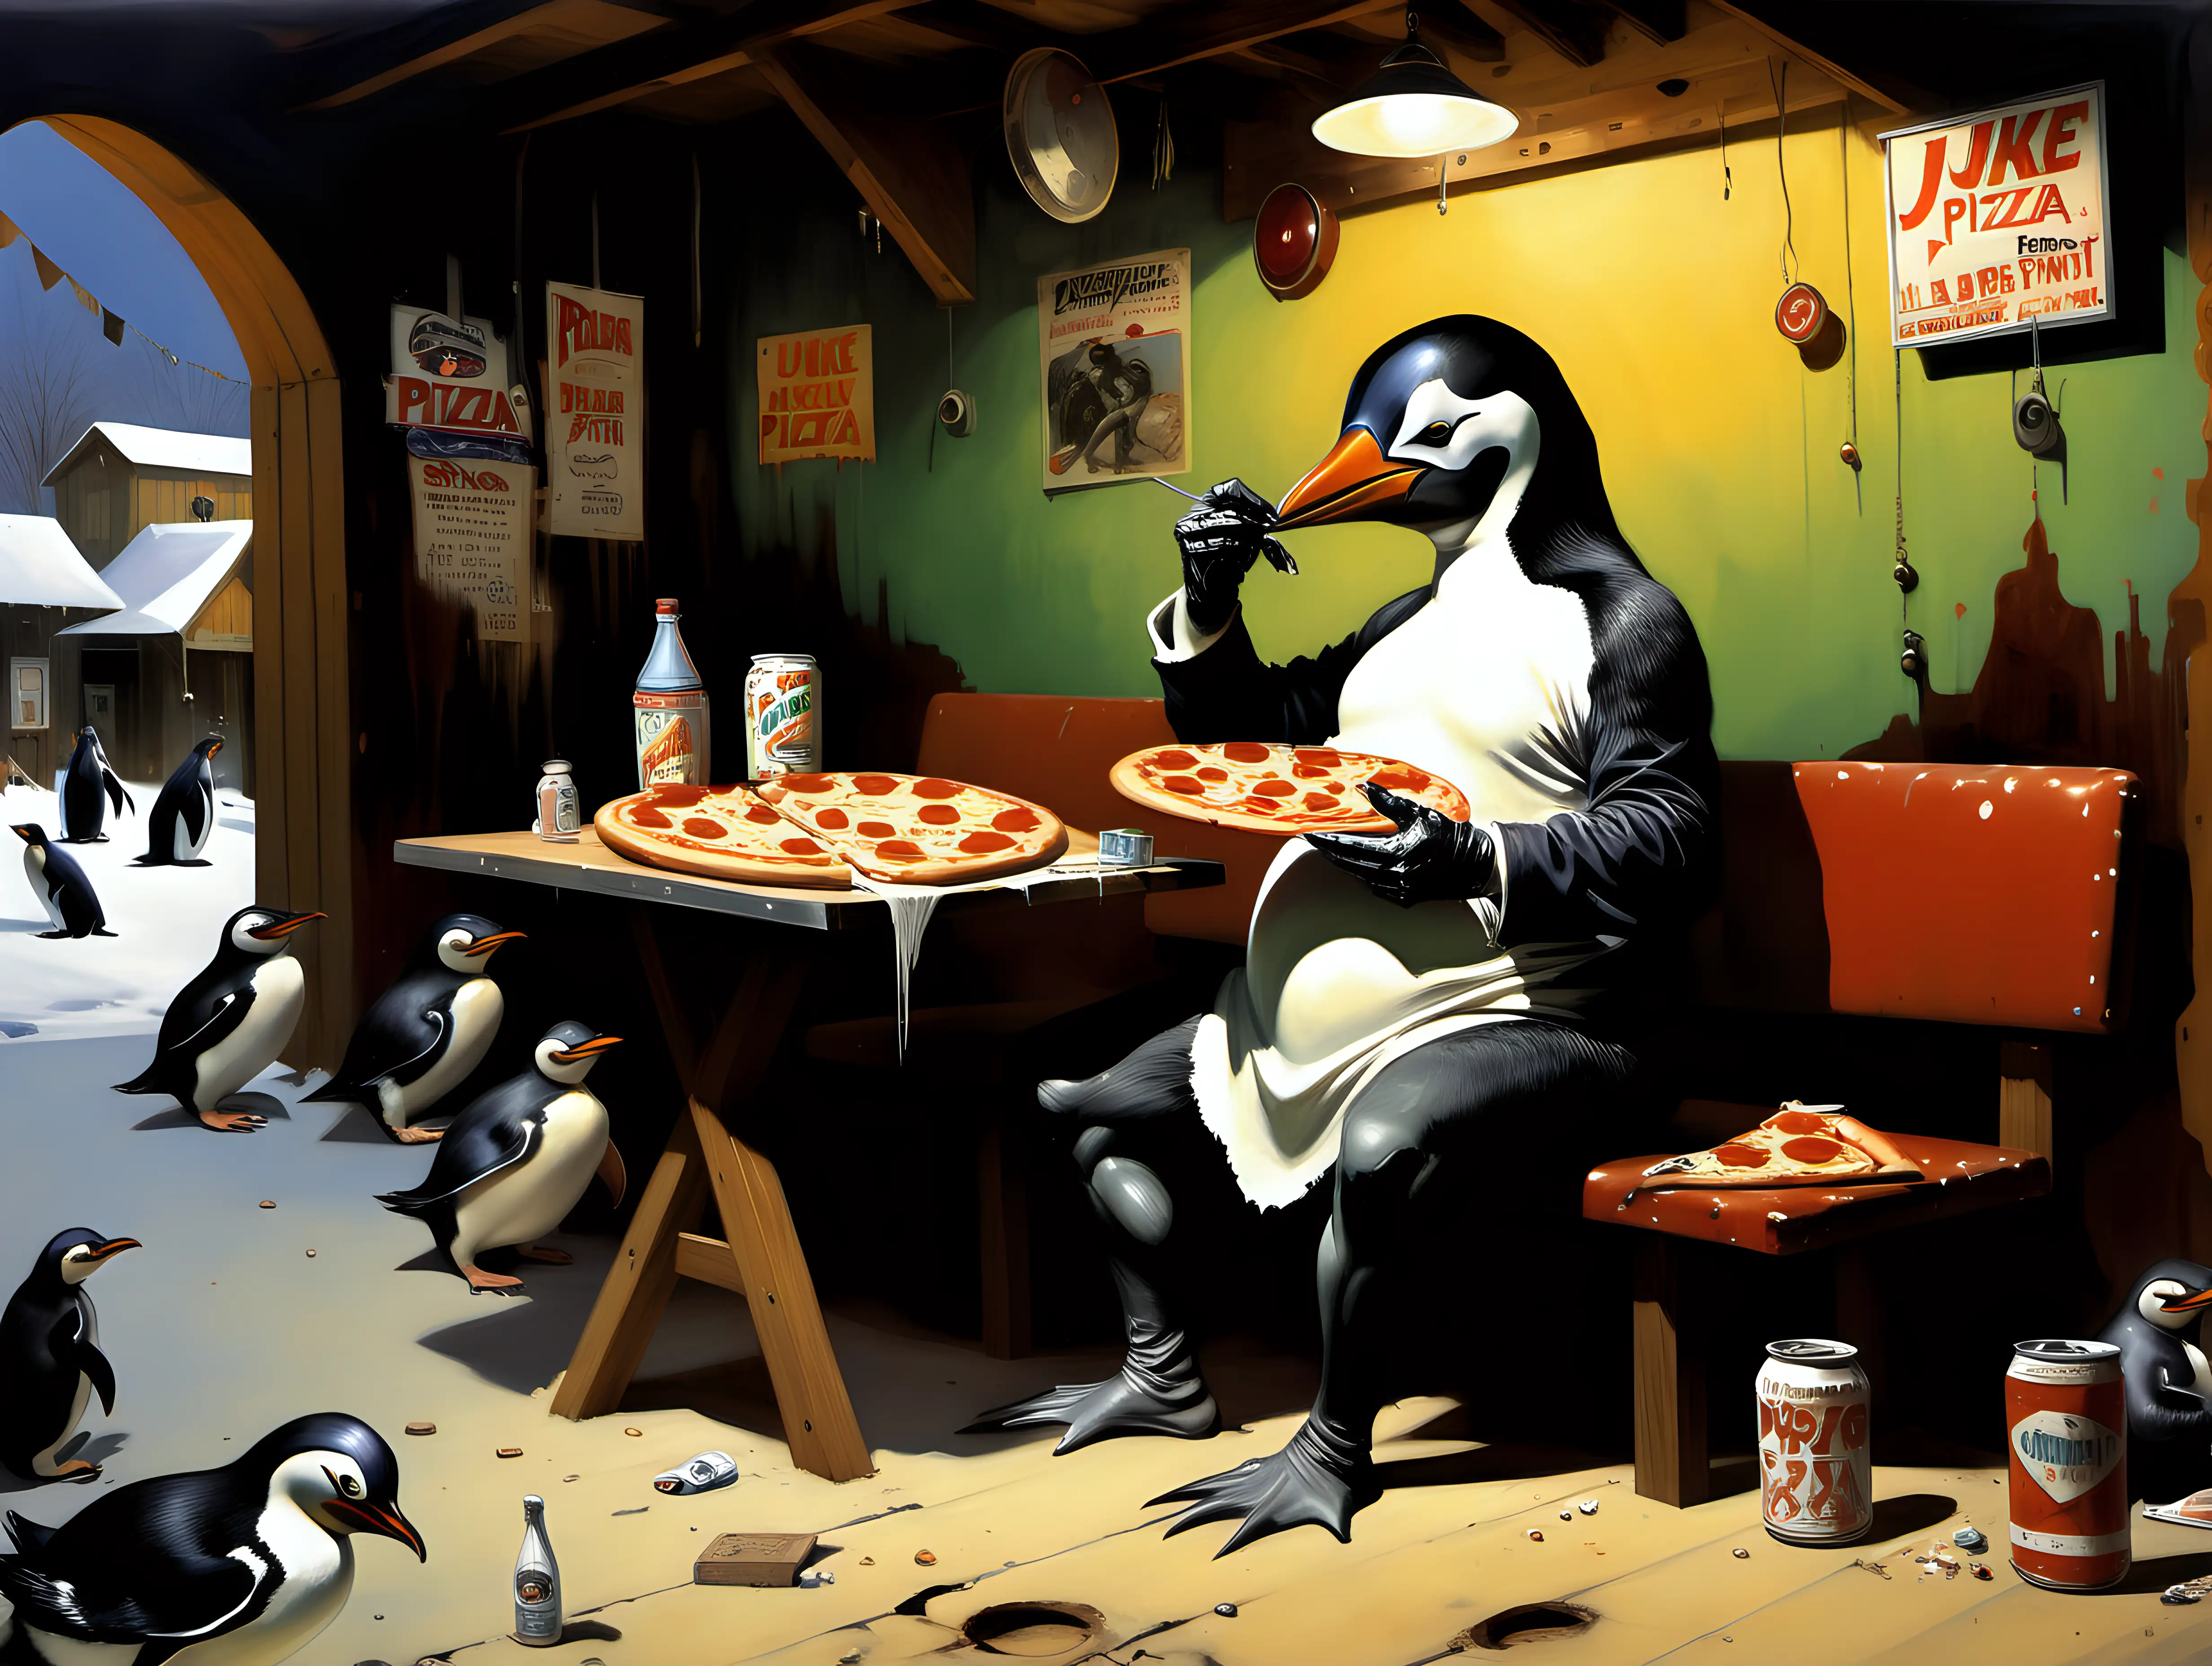 Penguin Indulging in Pizza Delight A Frank FrazettaInspired Juke Joint Extravaganza